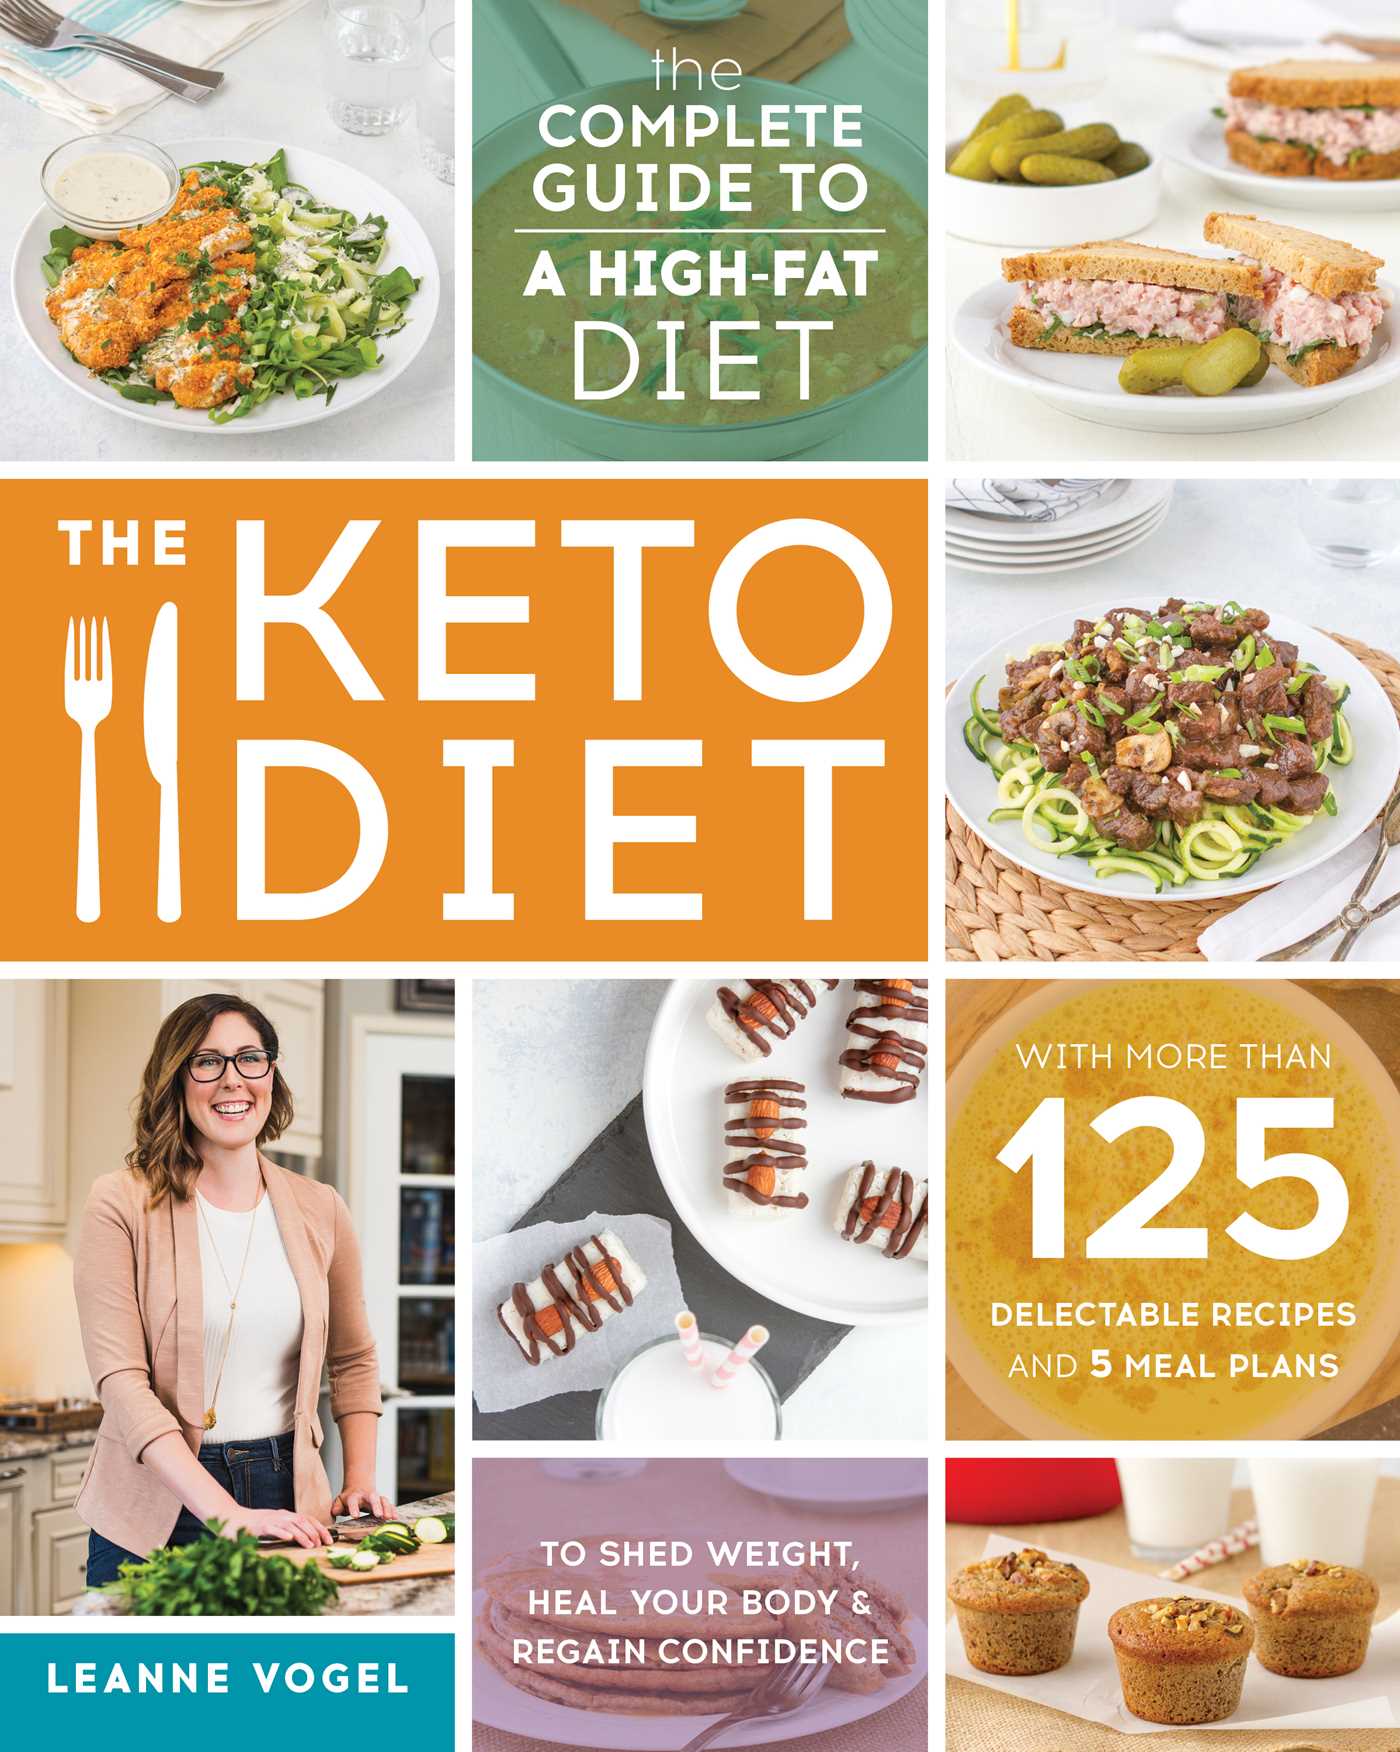 The Keto Diet : The Complete Guide to a High-Fat Diet, with More Than 125 Delectable Recipes and 5 Meal Plans to Shed Weight, Heal Your Body, and Regain Confidence (Paperback) - image 1 of 1